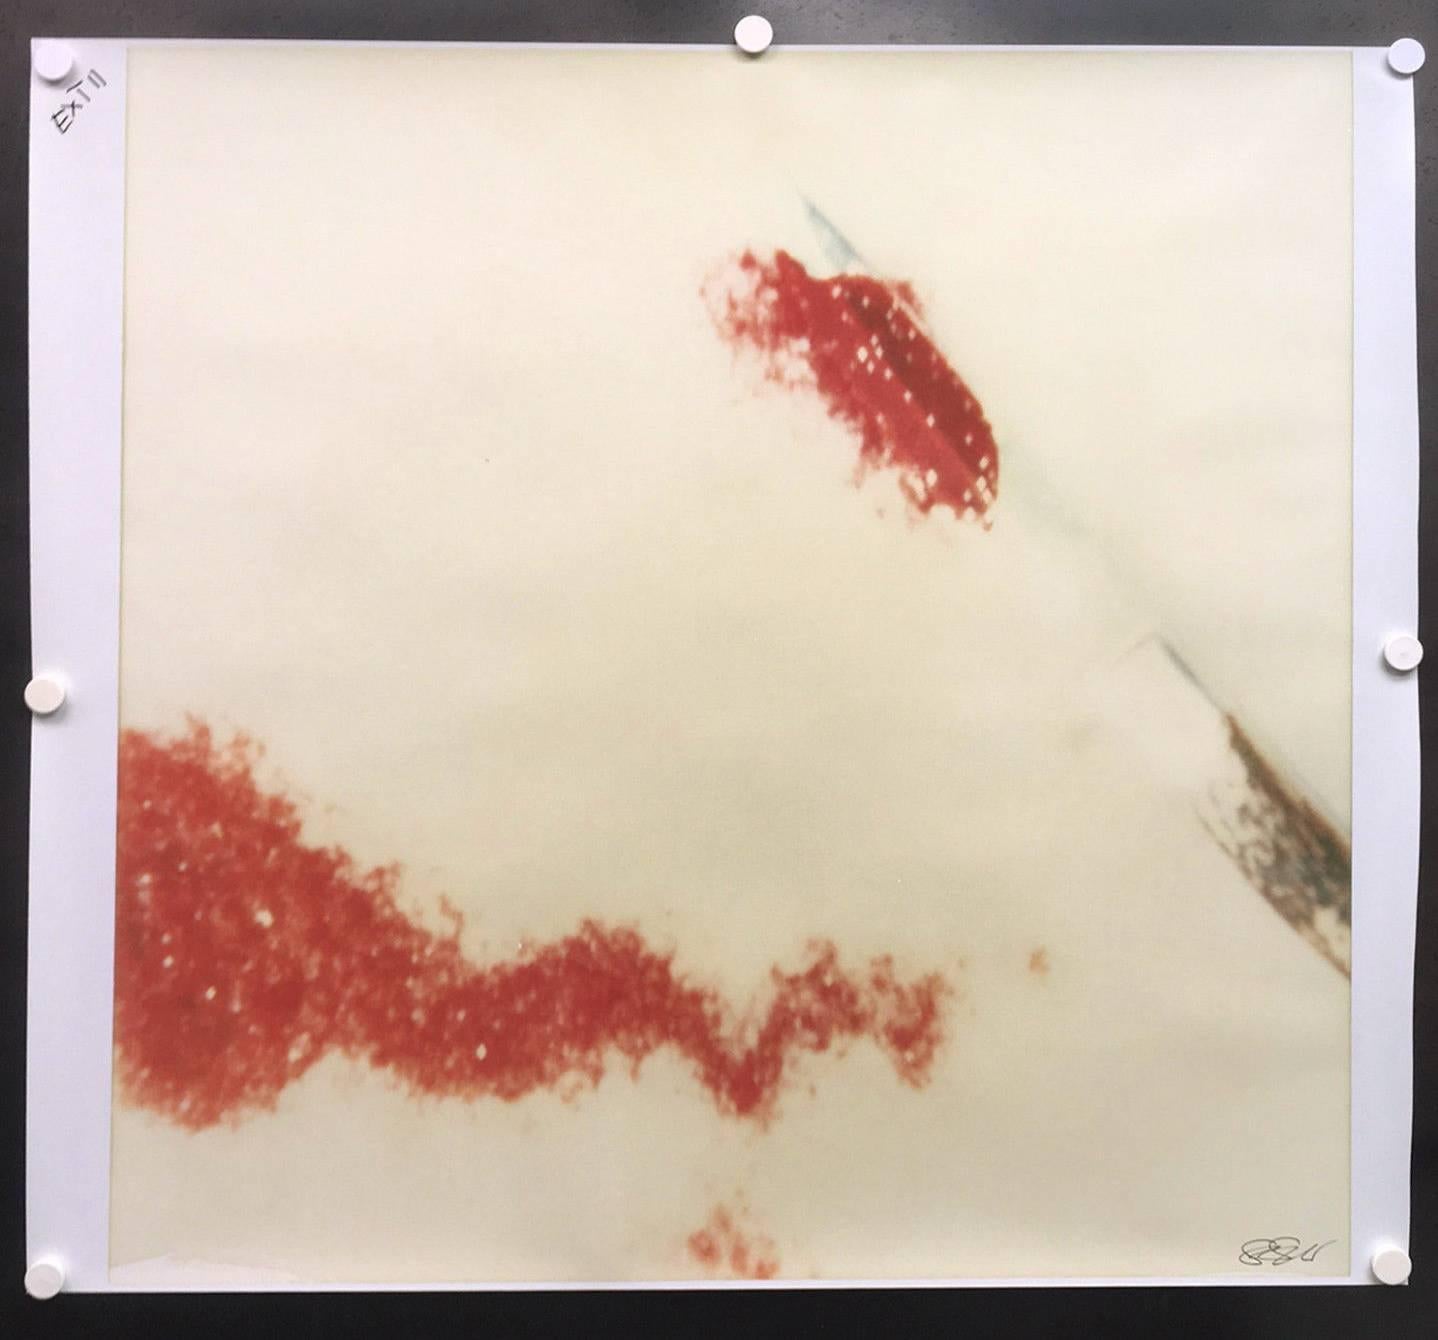 Stefanie Schneider Still-Life Photograph - Traces from the series Frozen - based on a Polaroid Original - Proof 